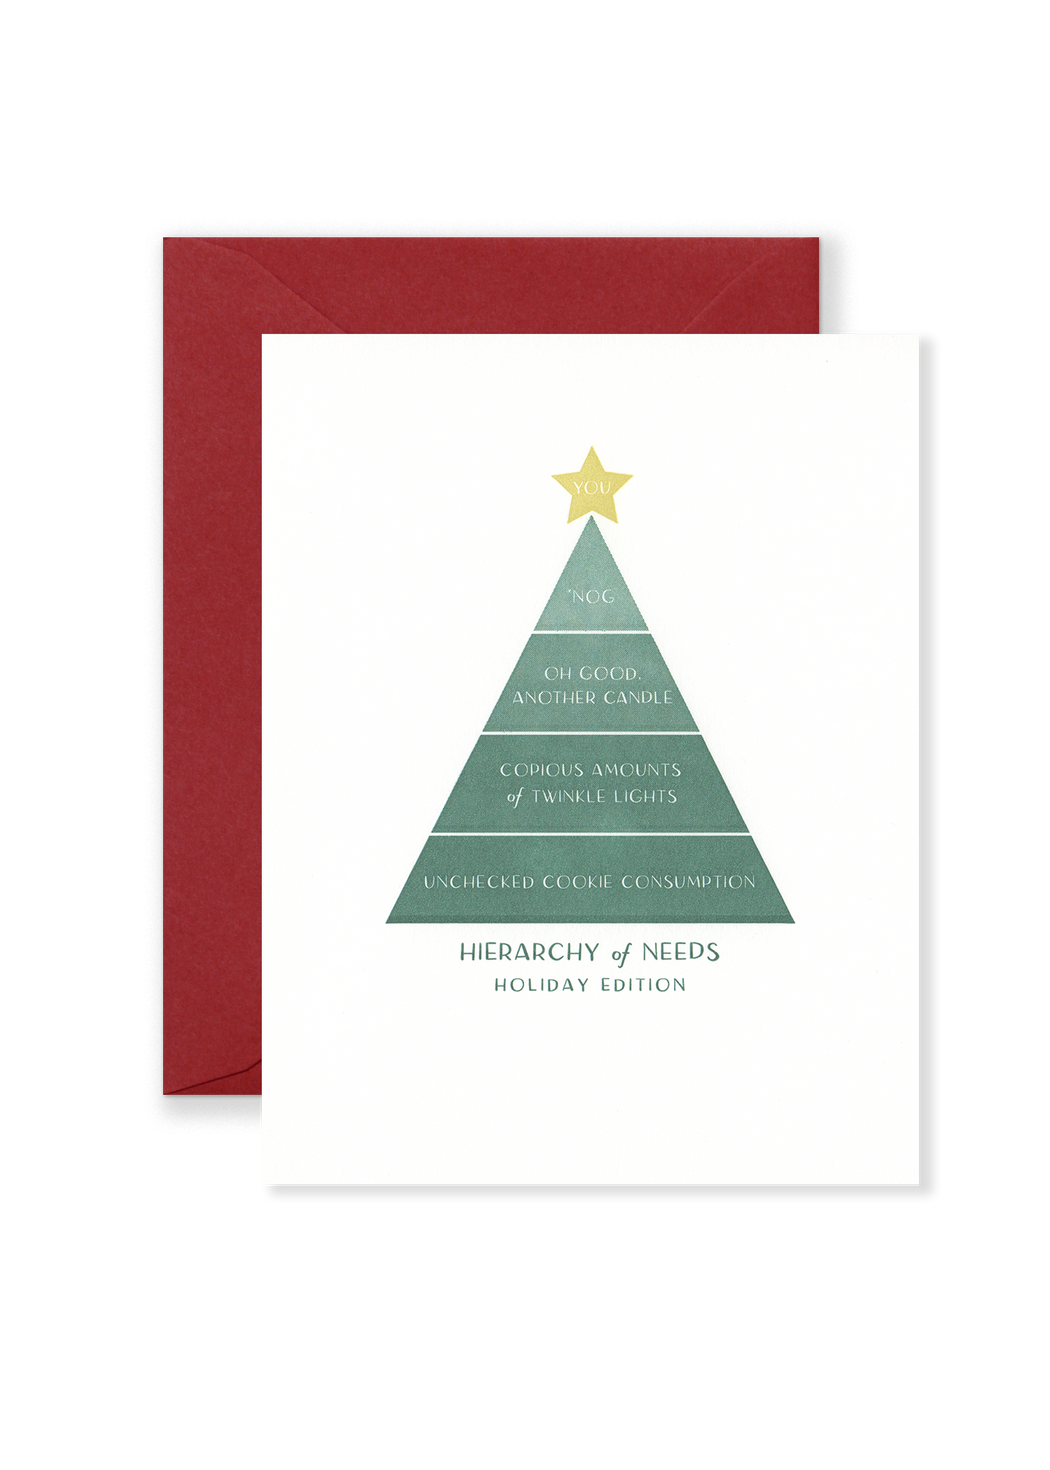 Hierarchy of Needs Holiday Edition Card